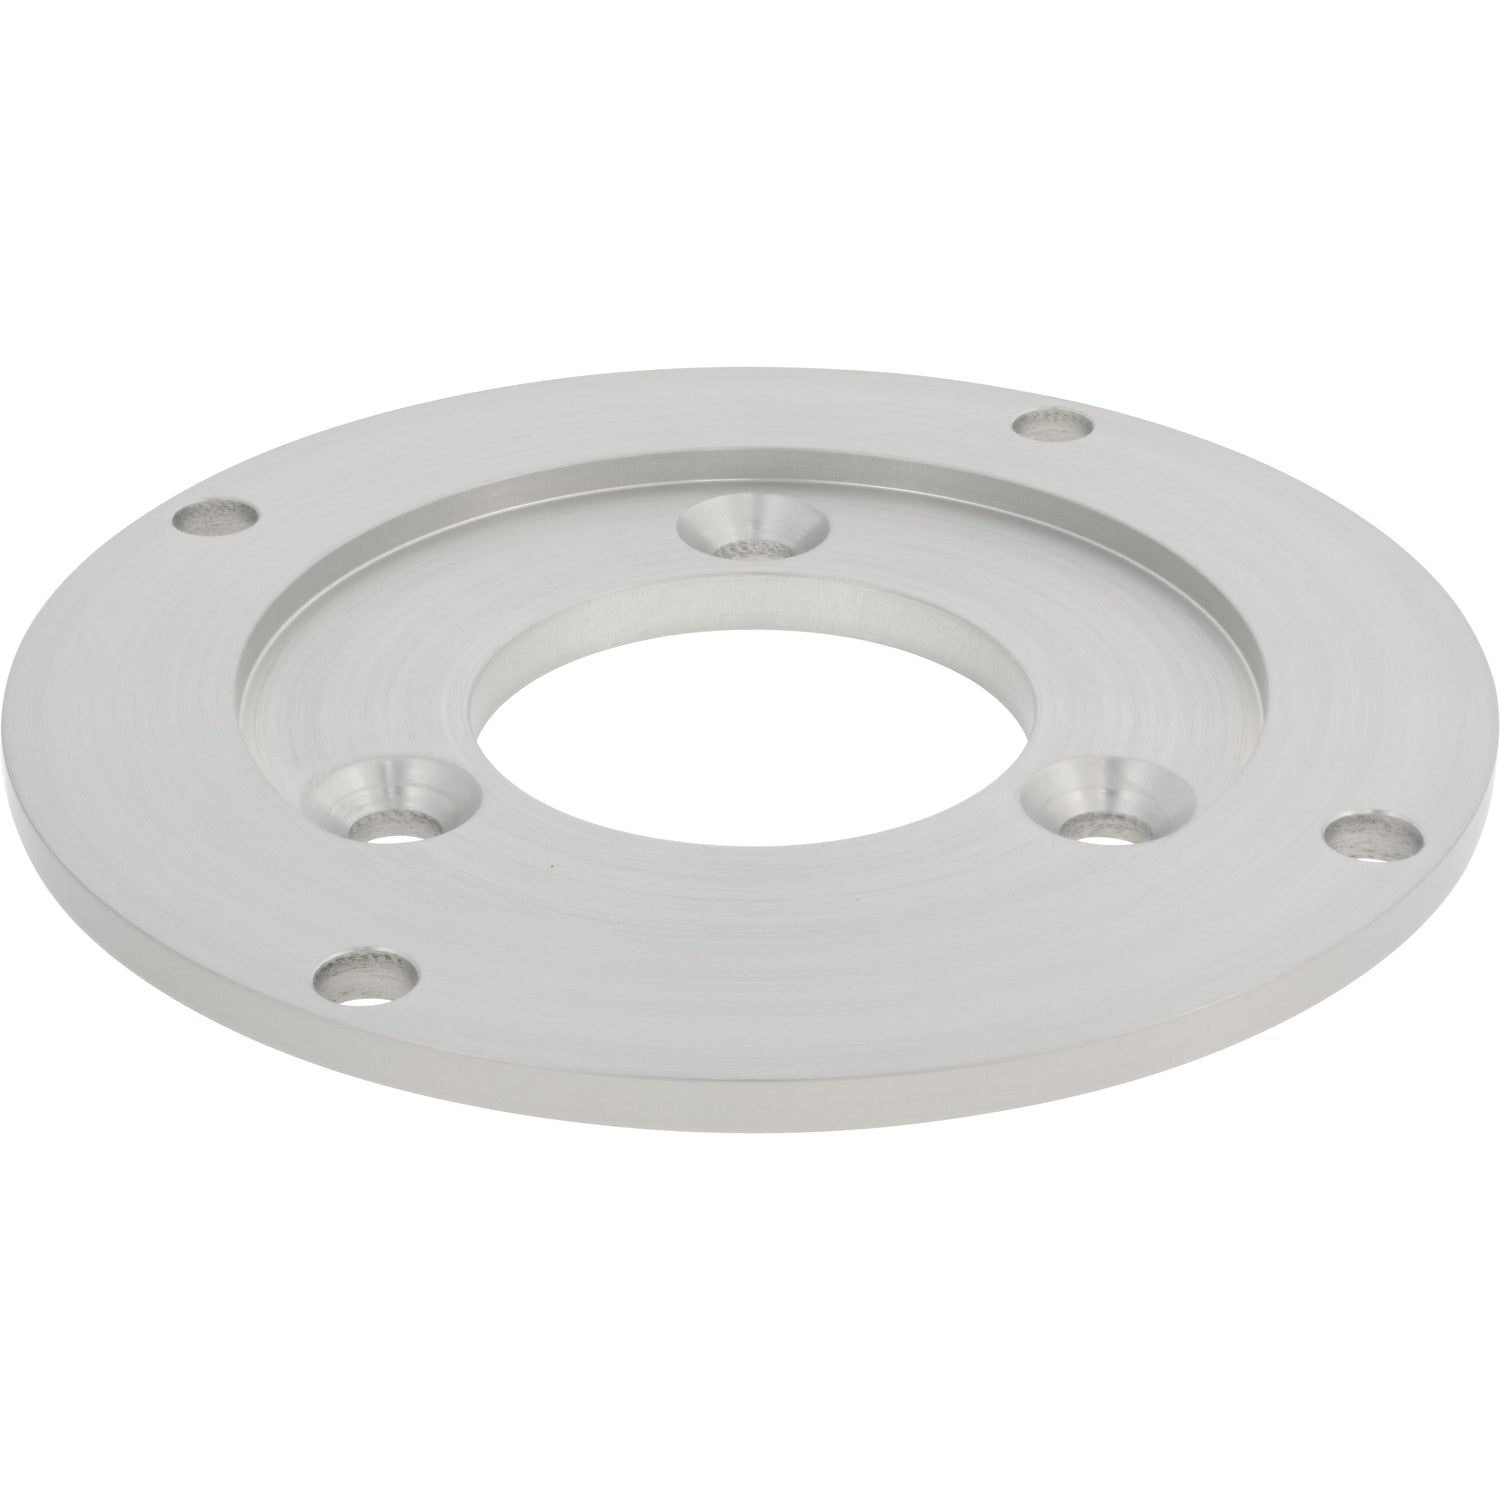 Disk shaped aluminum part with large center hole and multiple smaller mounting holes shown on white surface. 